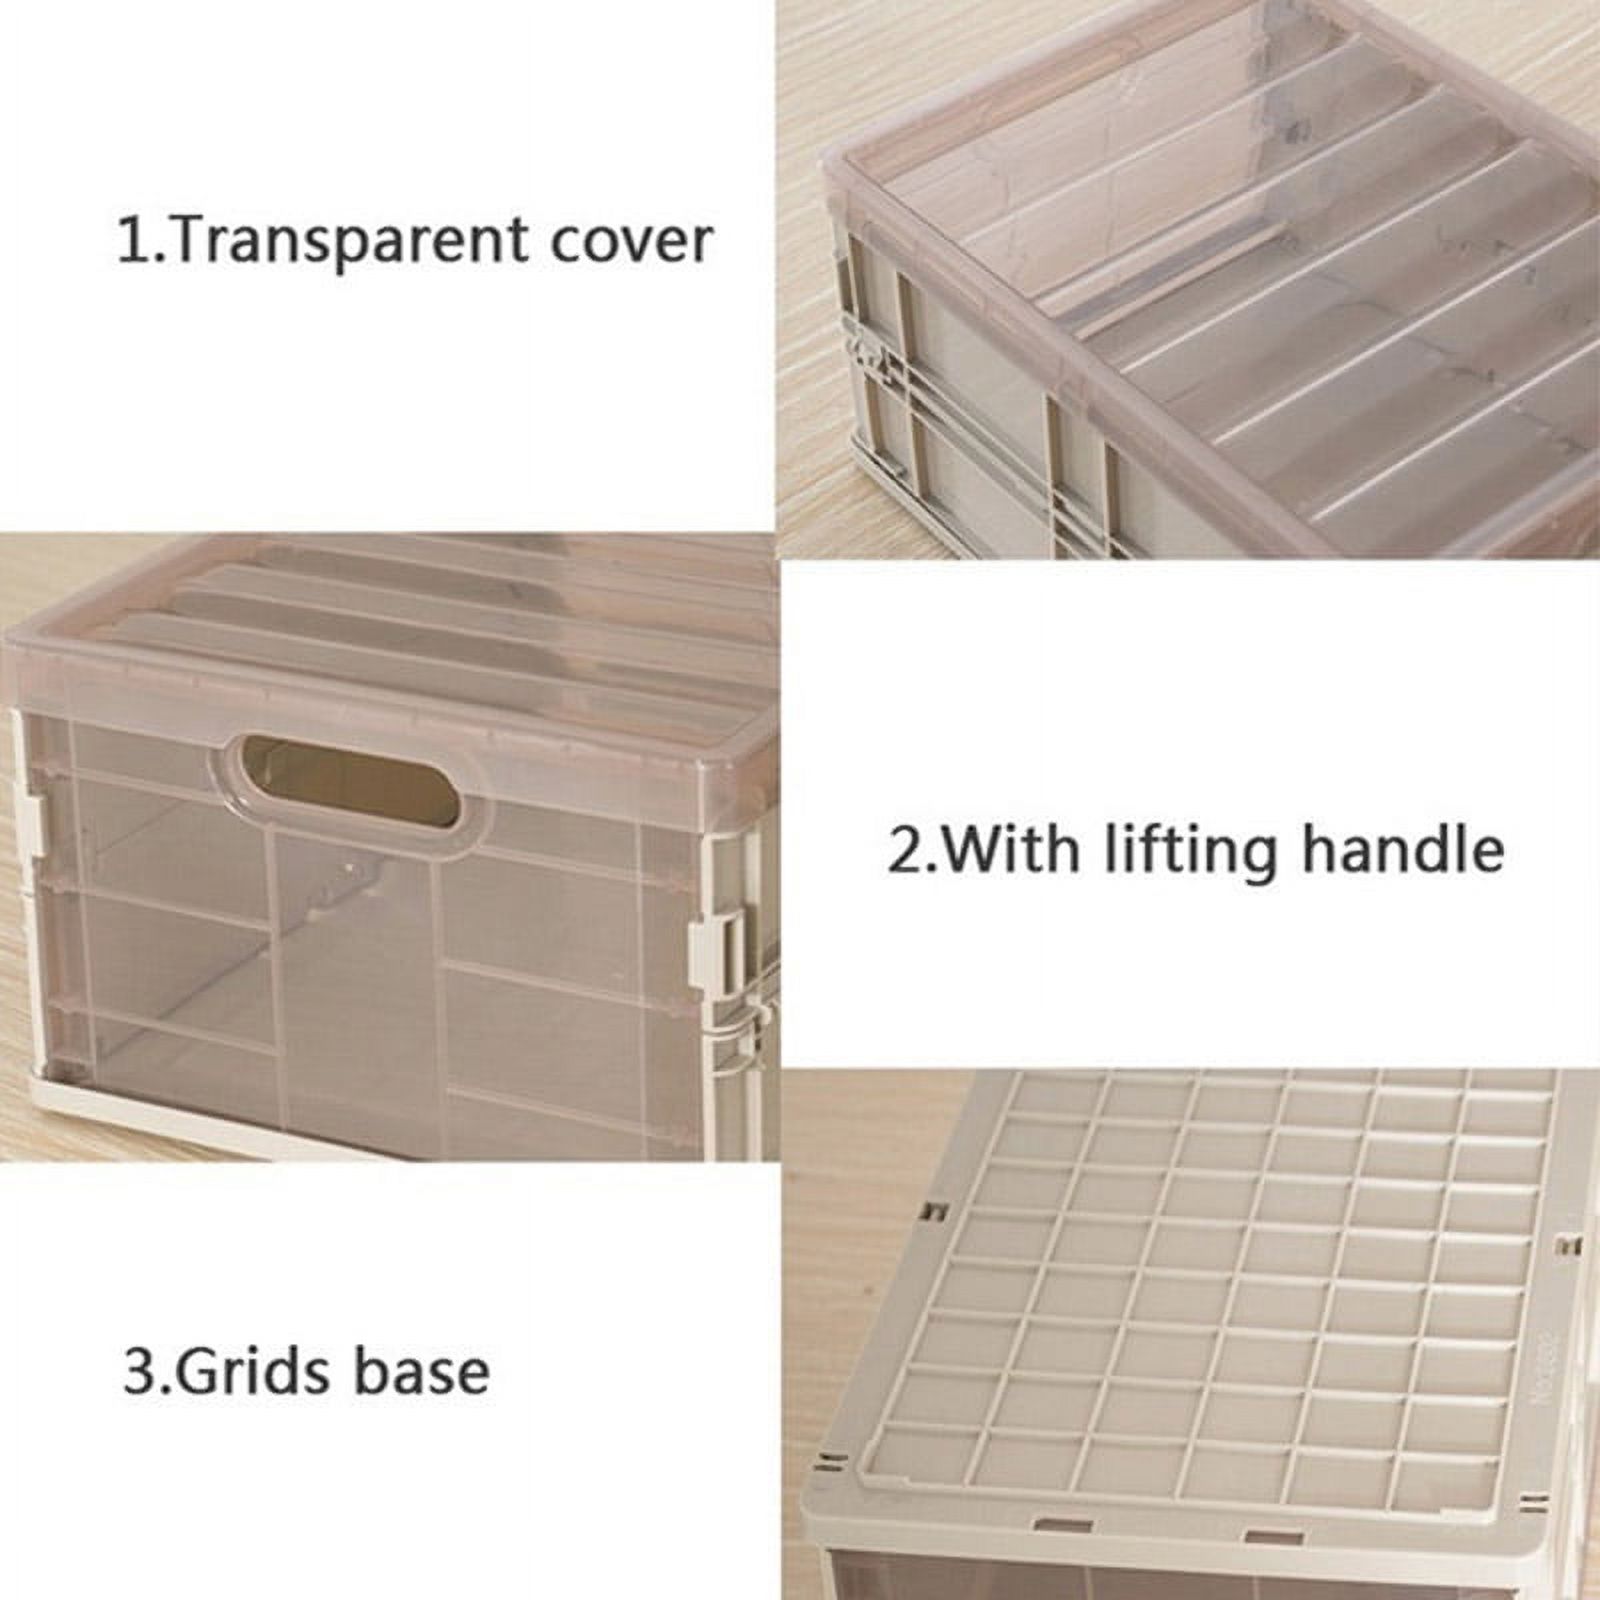 Foldable Plastic Storage Container Basket With Lid, Thickened Student Organizer Box, Simple Plastic Box, Storage Boxes Used for Wardrobe/Clothing/Books - image 5 of 8